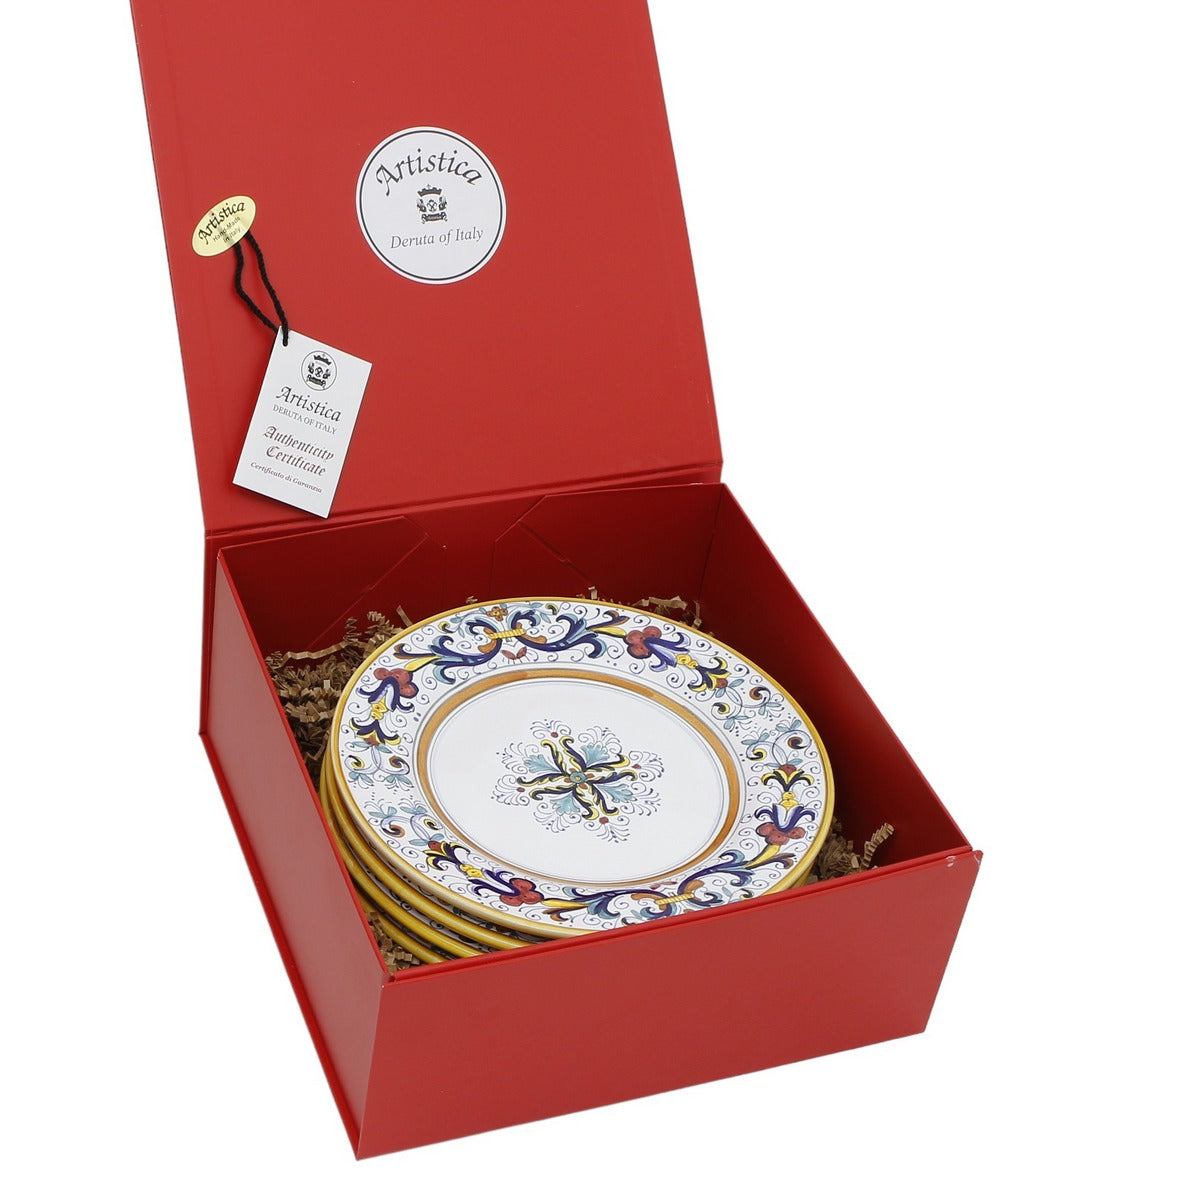 GIFT BOX: DeLuxe Glossy Red Gift Box with Ricco Deruta Salad Plates (Set of 4 pcs)